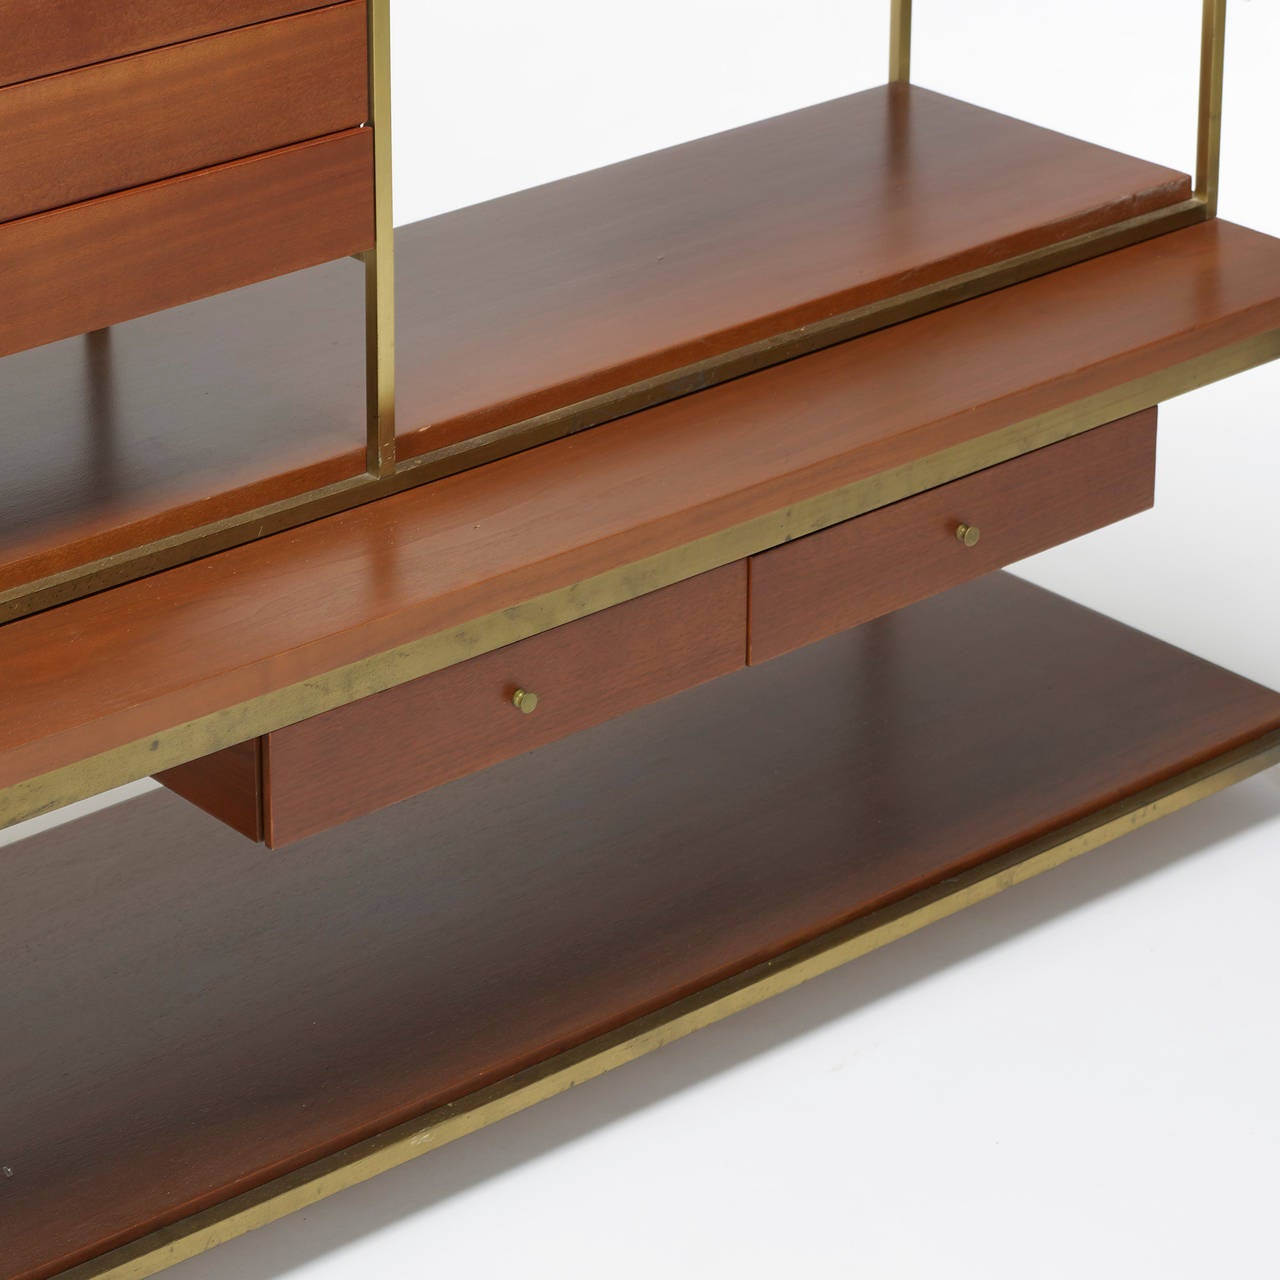 American Irwin Collection Shelving Unit by Paul McCobb for Calvin